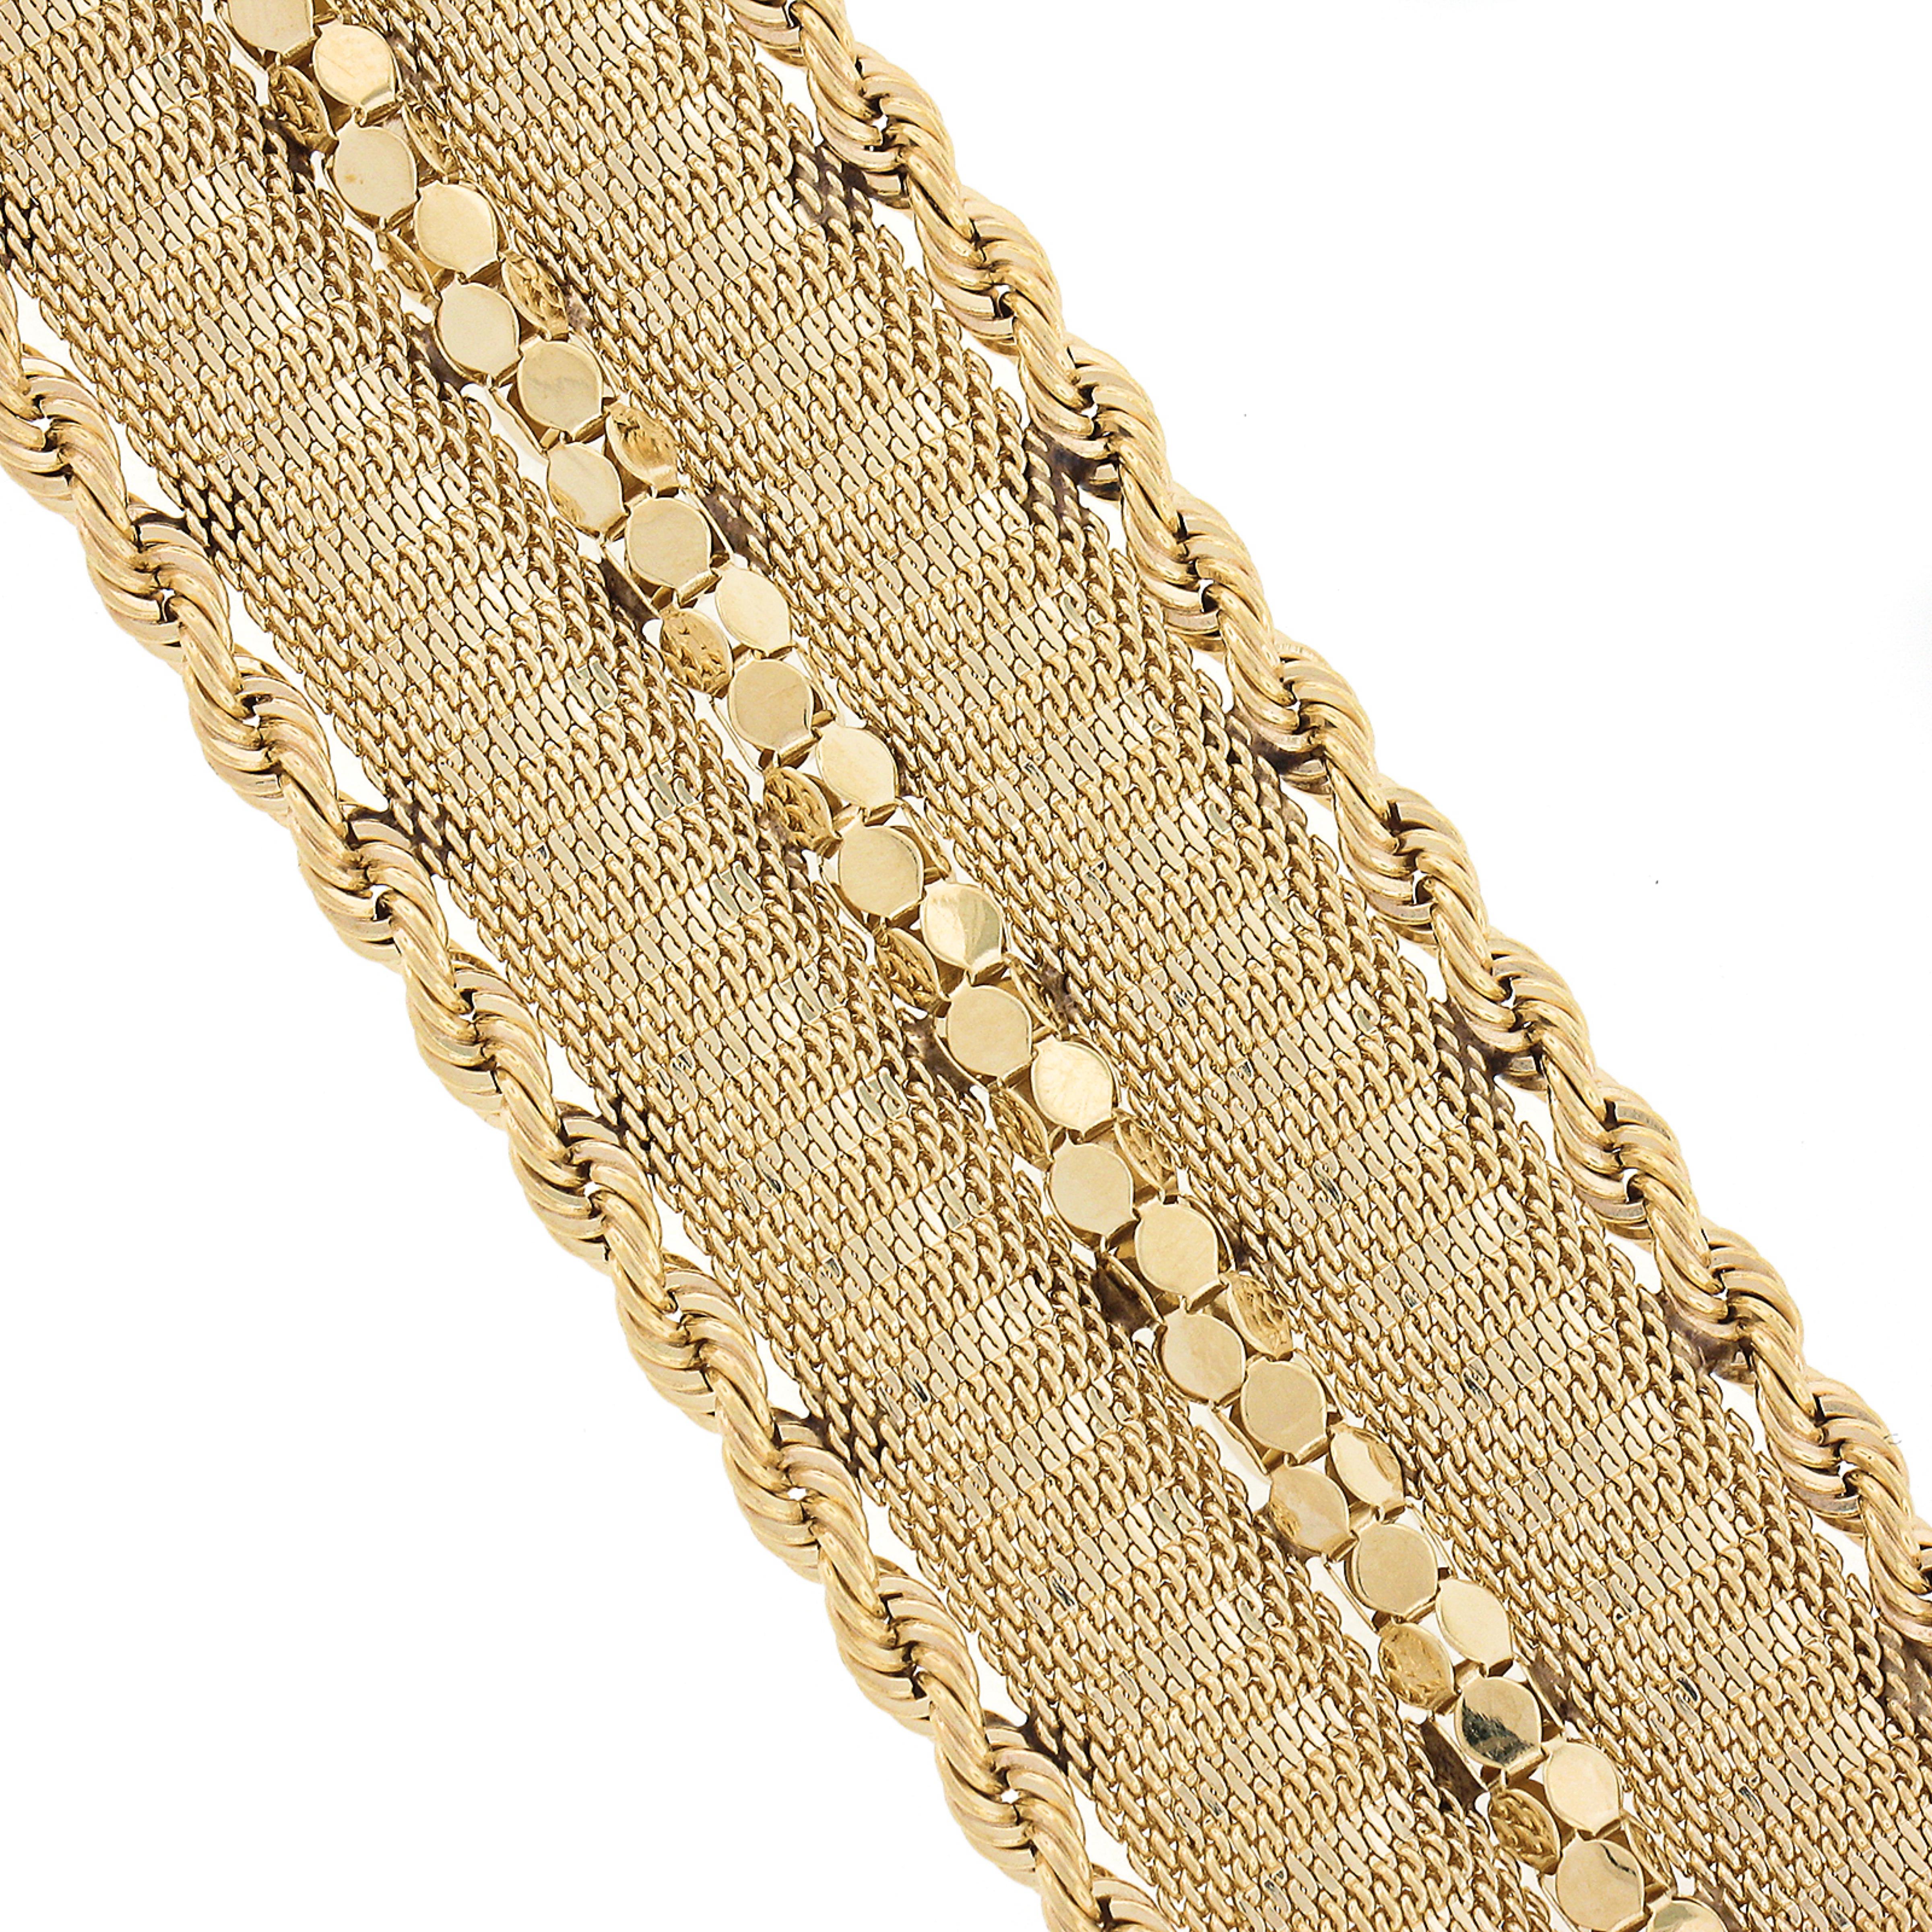 Vintage 14k Gold Mesh with Popcorn Link and Rope Chain Sides Wide Strap Bracelet In Excellent Condition For Sale In Montclair, NJ